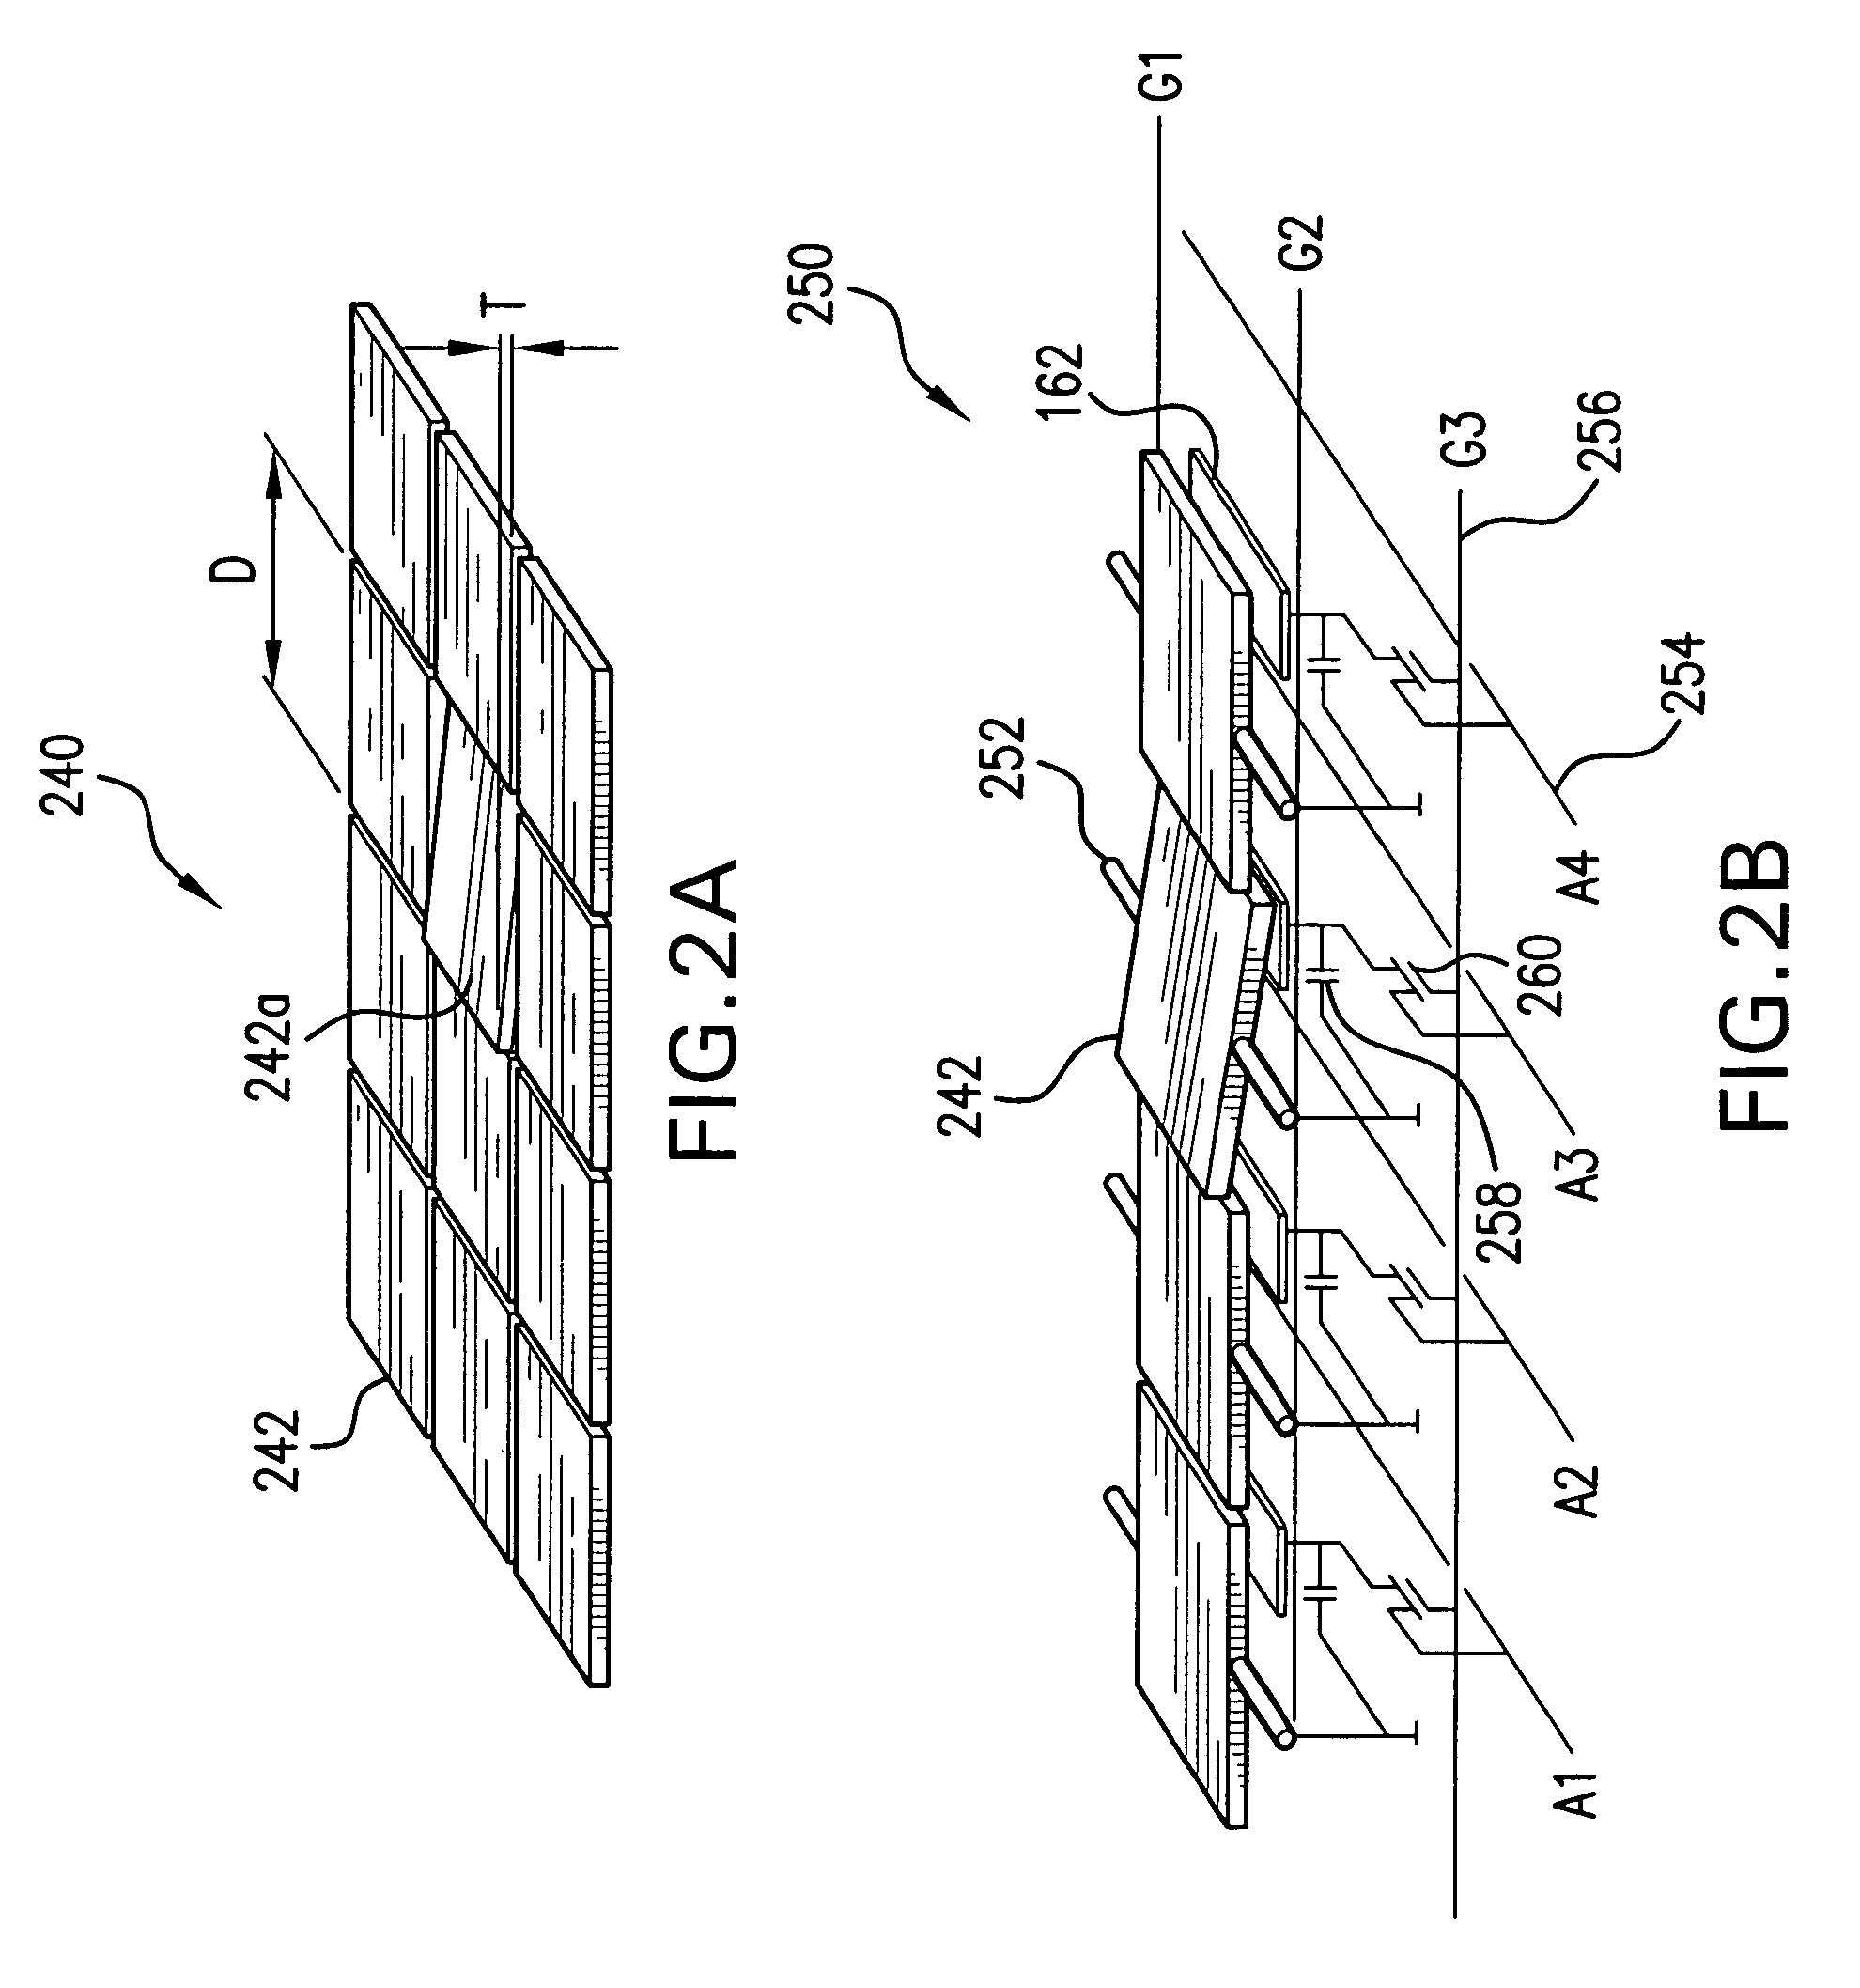 System and method to compensate for static and dynamic misalignments and deformations in a maskless lithography tool